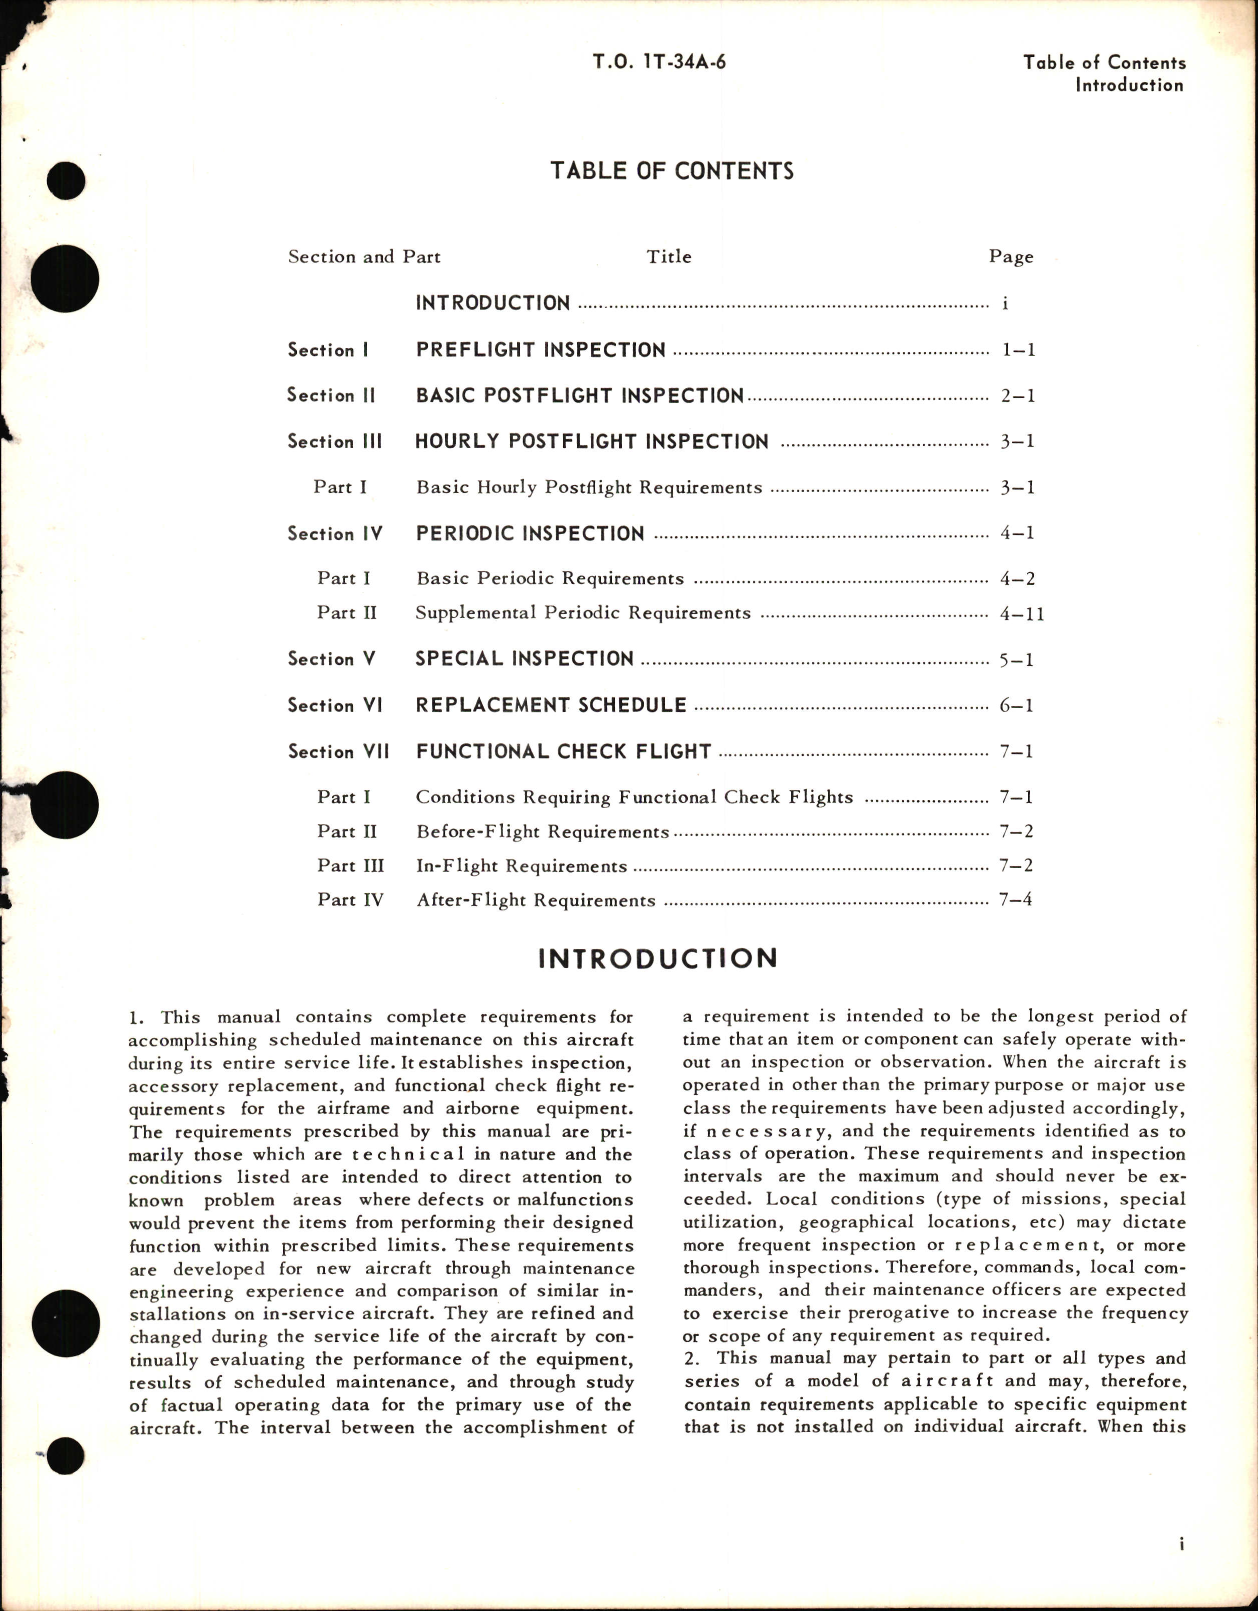 Sample page 3 from AirCorps Library document: Aircraft Scheduled Inspection and Maintenance Requirements for T-34A